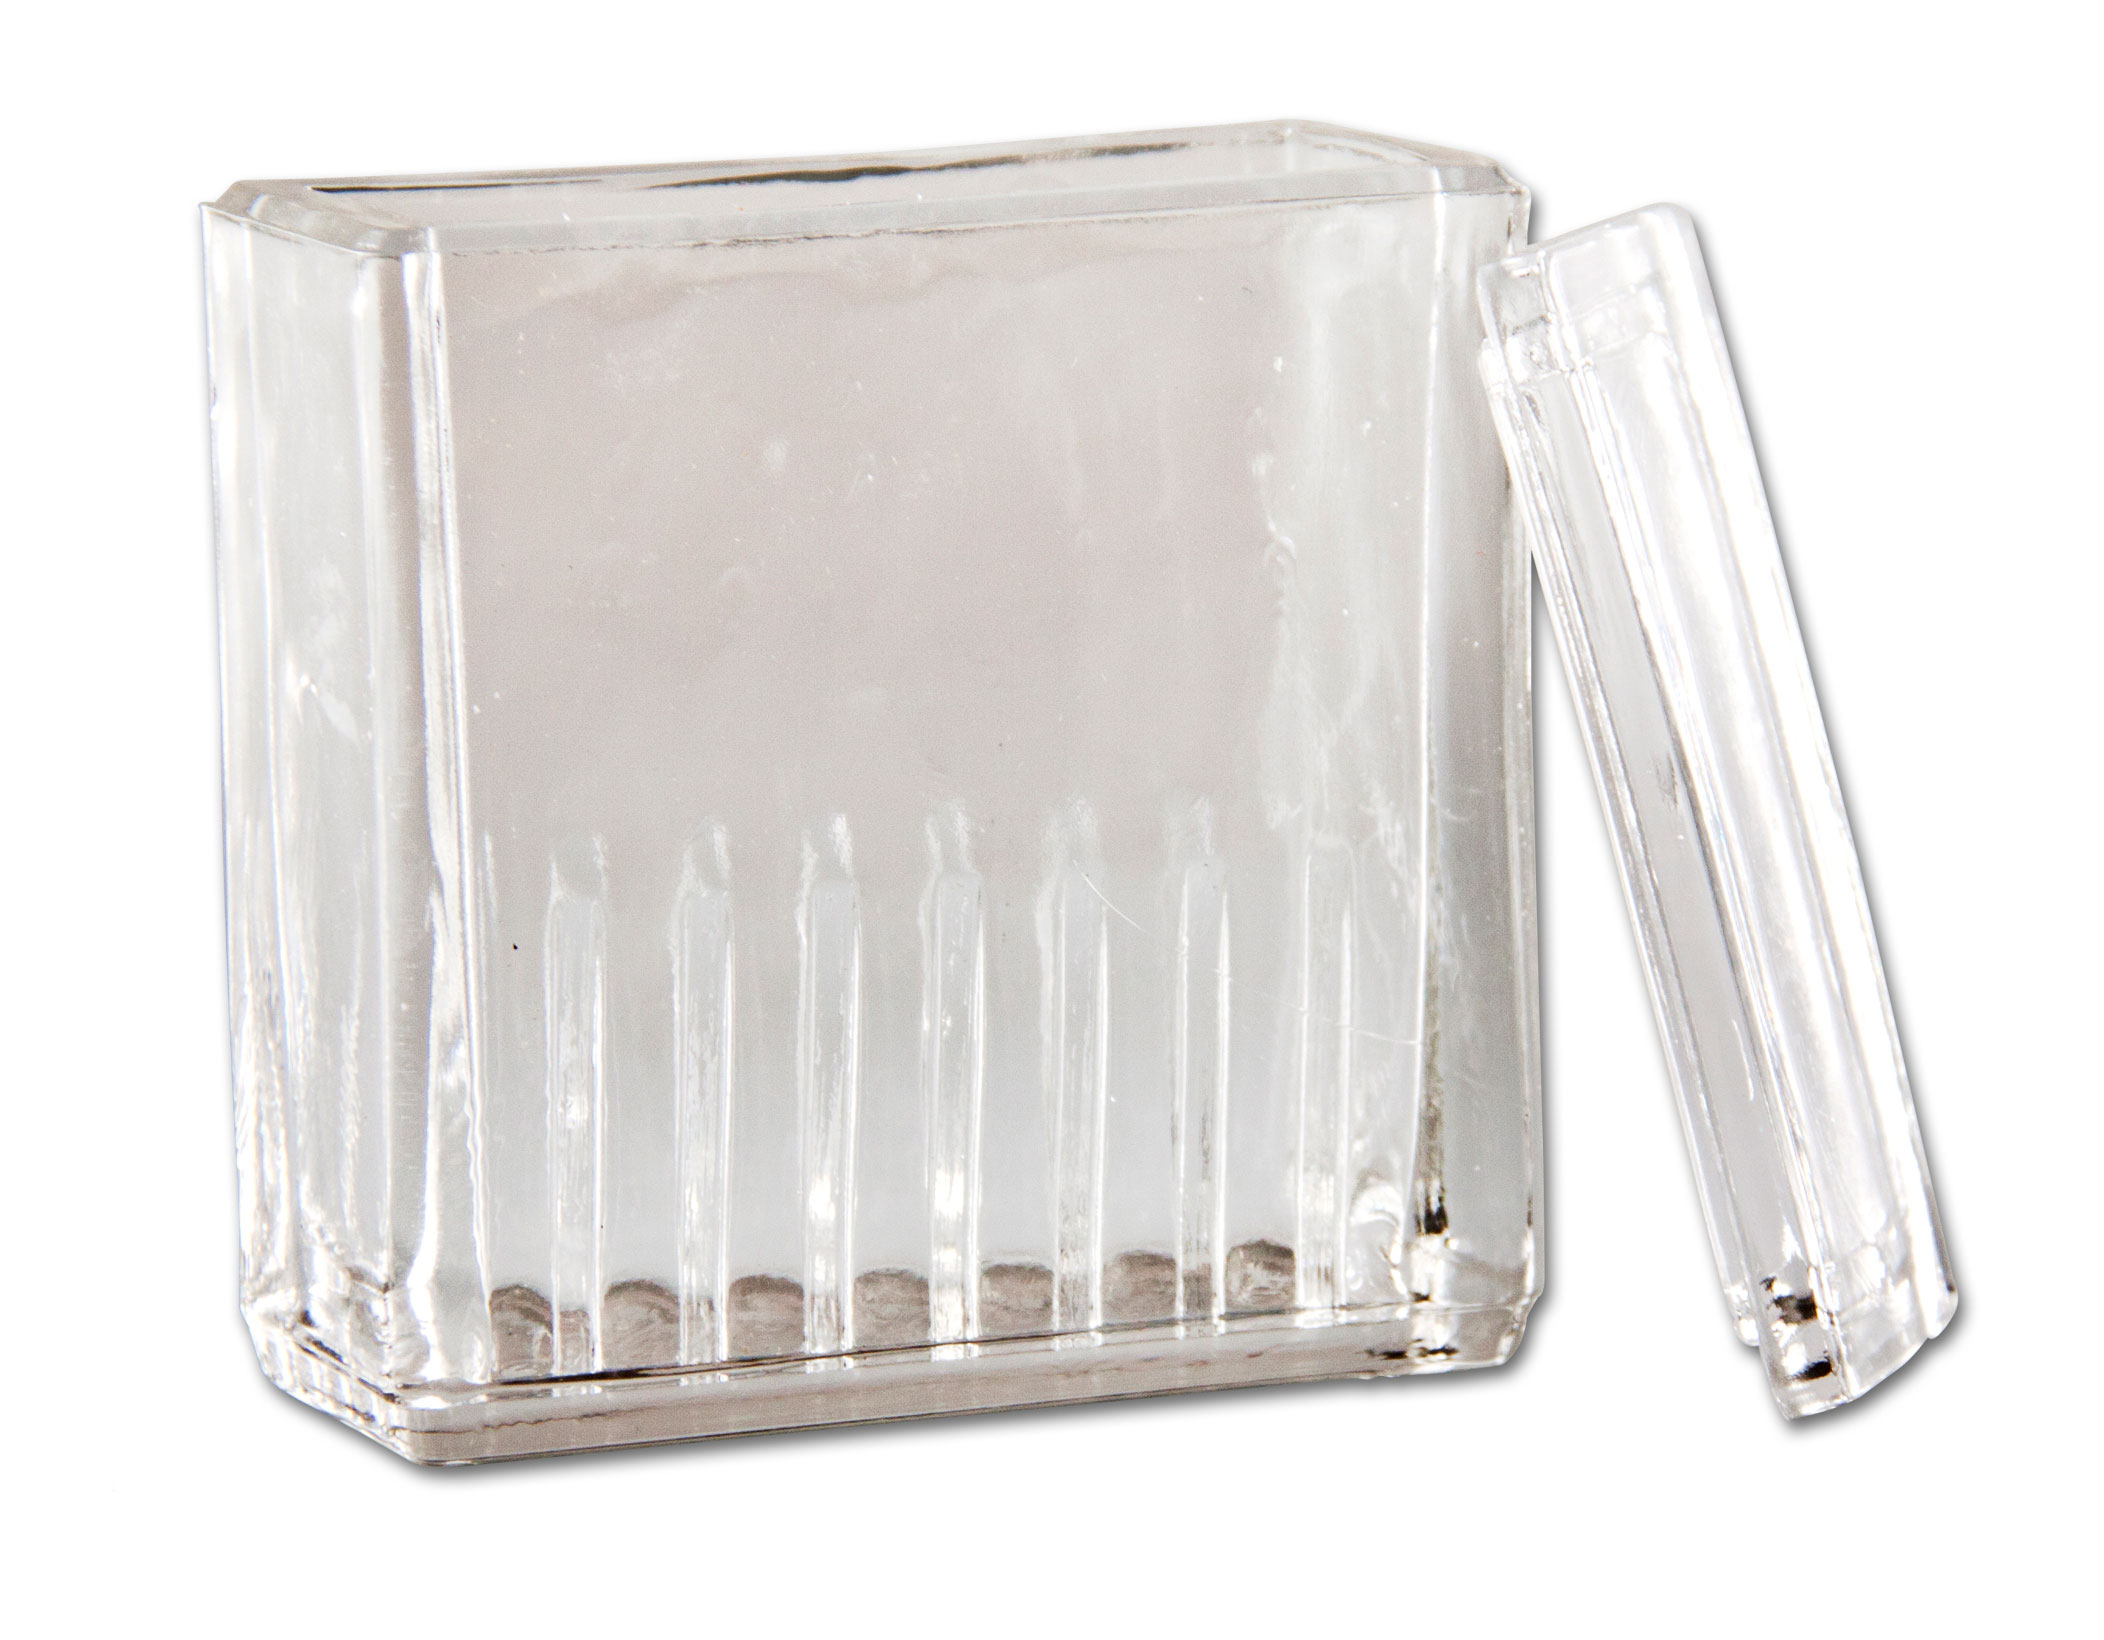 Glass staining cuvette. Type: Hellendahl. Capacity (Slides): 16, with cover